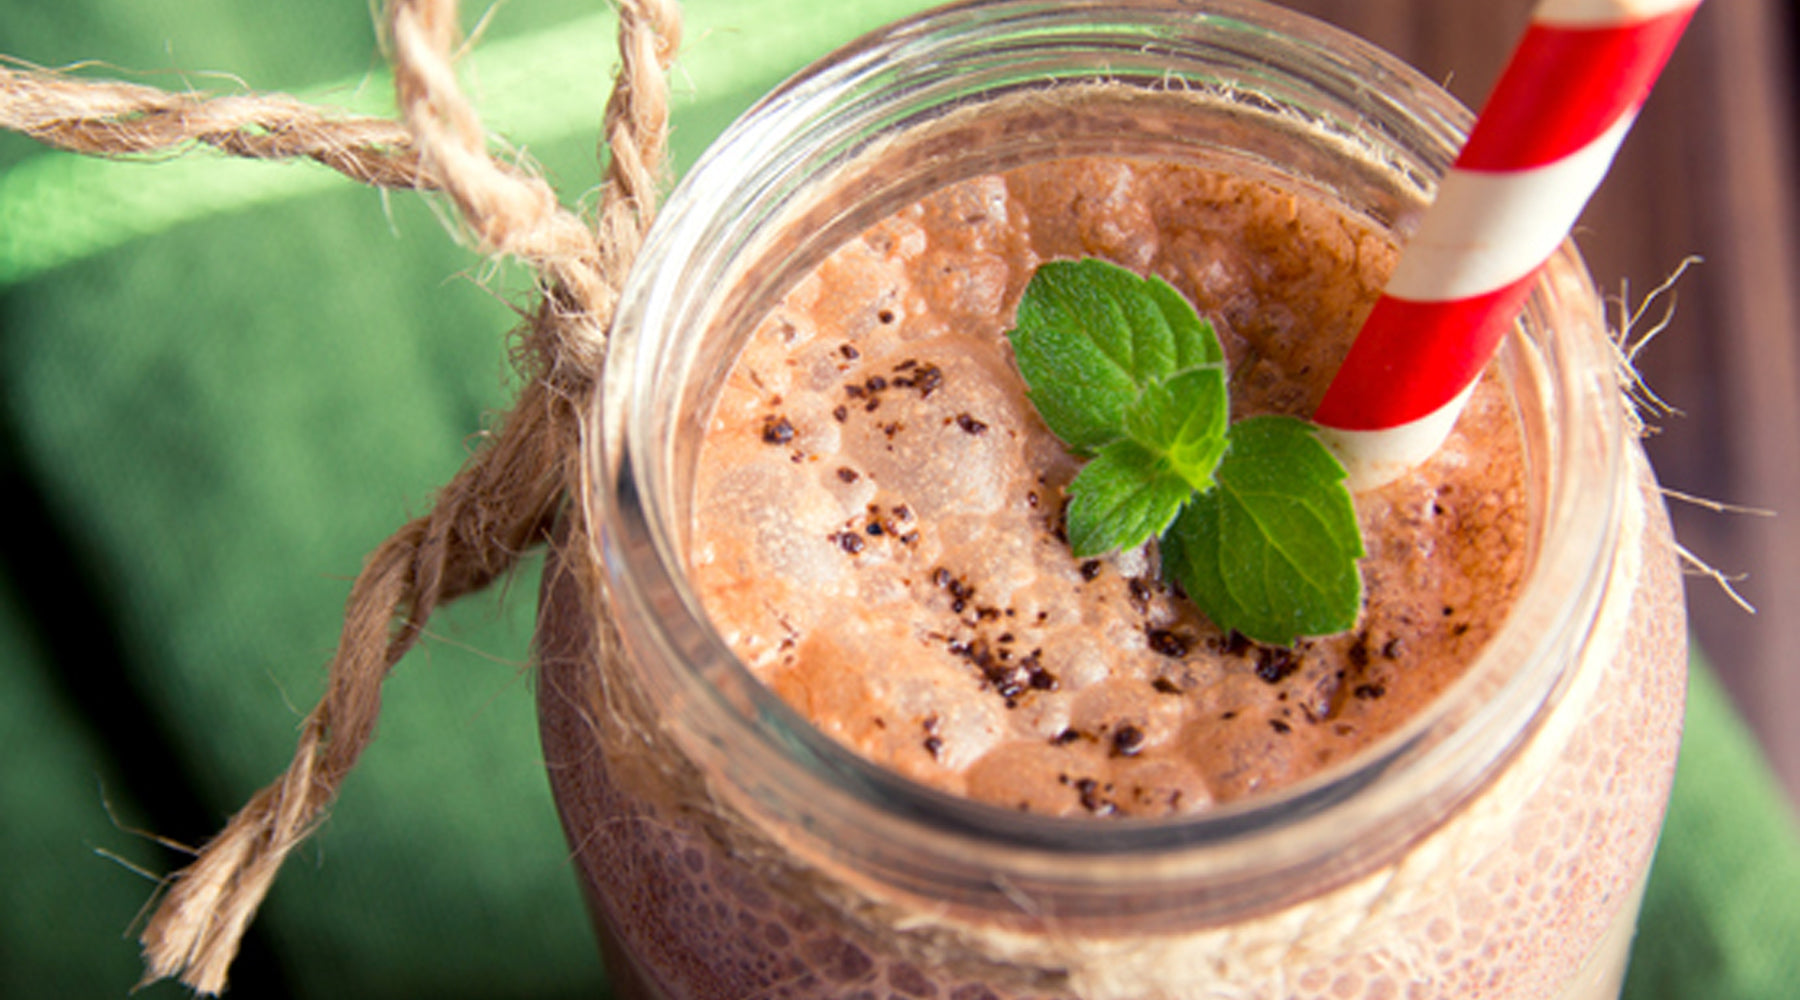 Chocolate Peppermint Smoothie